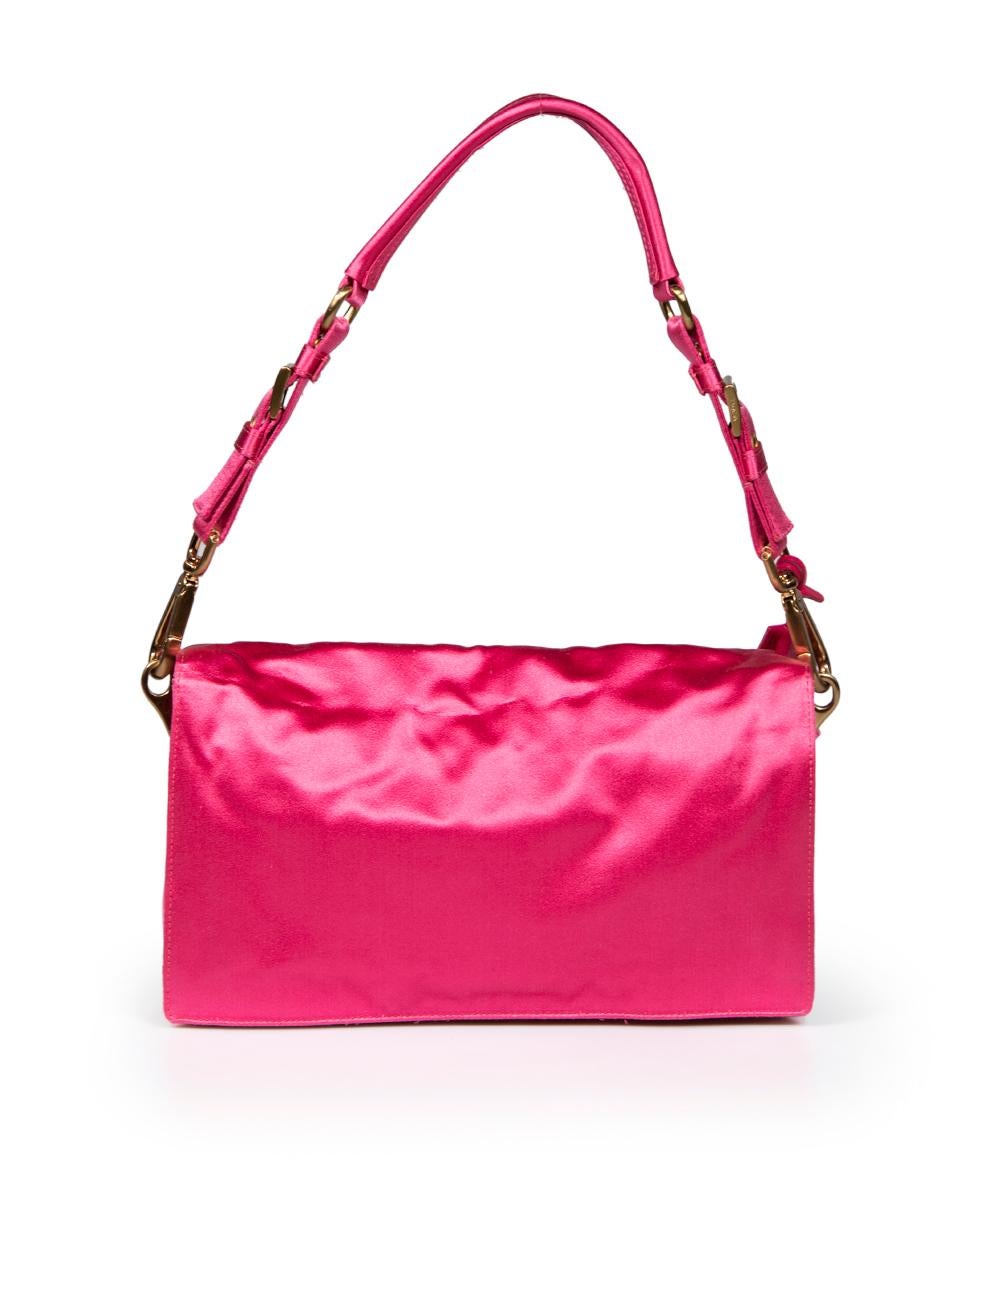 Prada Pink Satin Flap Shoulder Bag In Good Condition For Sale In London, GB